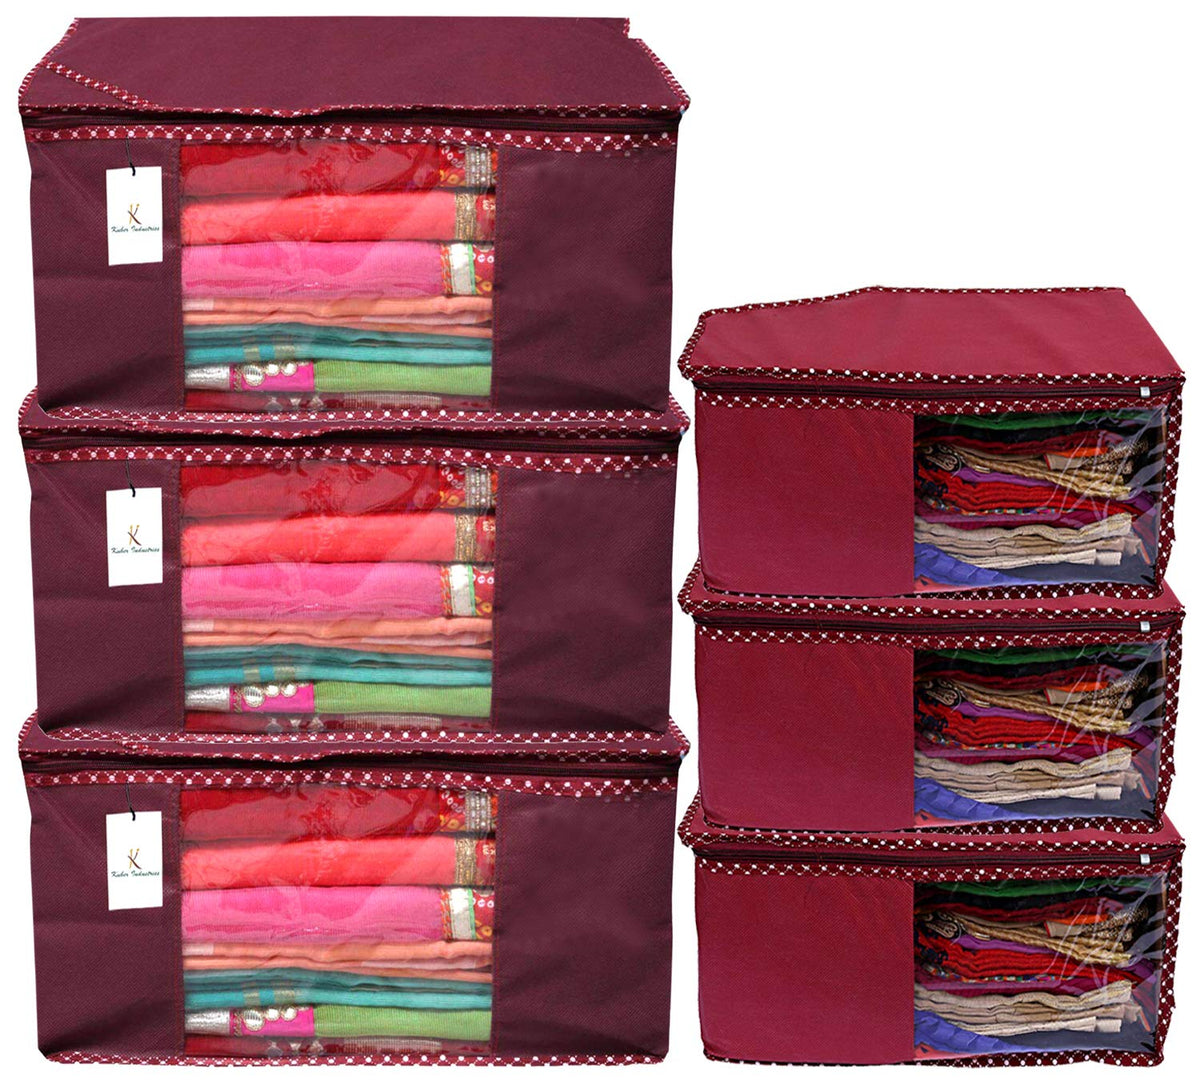 Kuber Industries Saree Covers With Zip|Saree Covers For Storage|Saree Packing Covers For Wedding|Pack of 6 (Maroon)